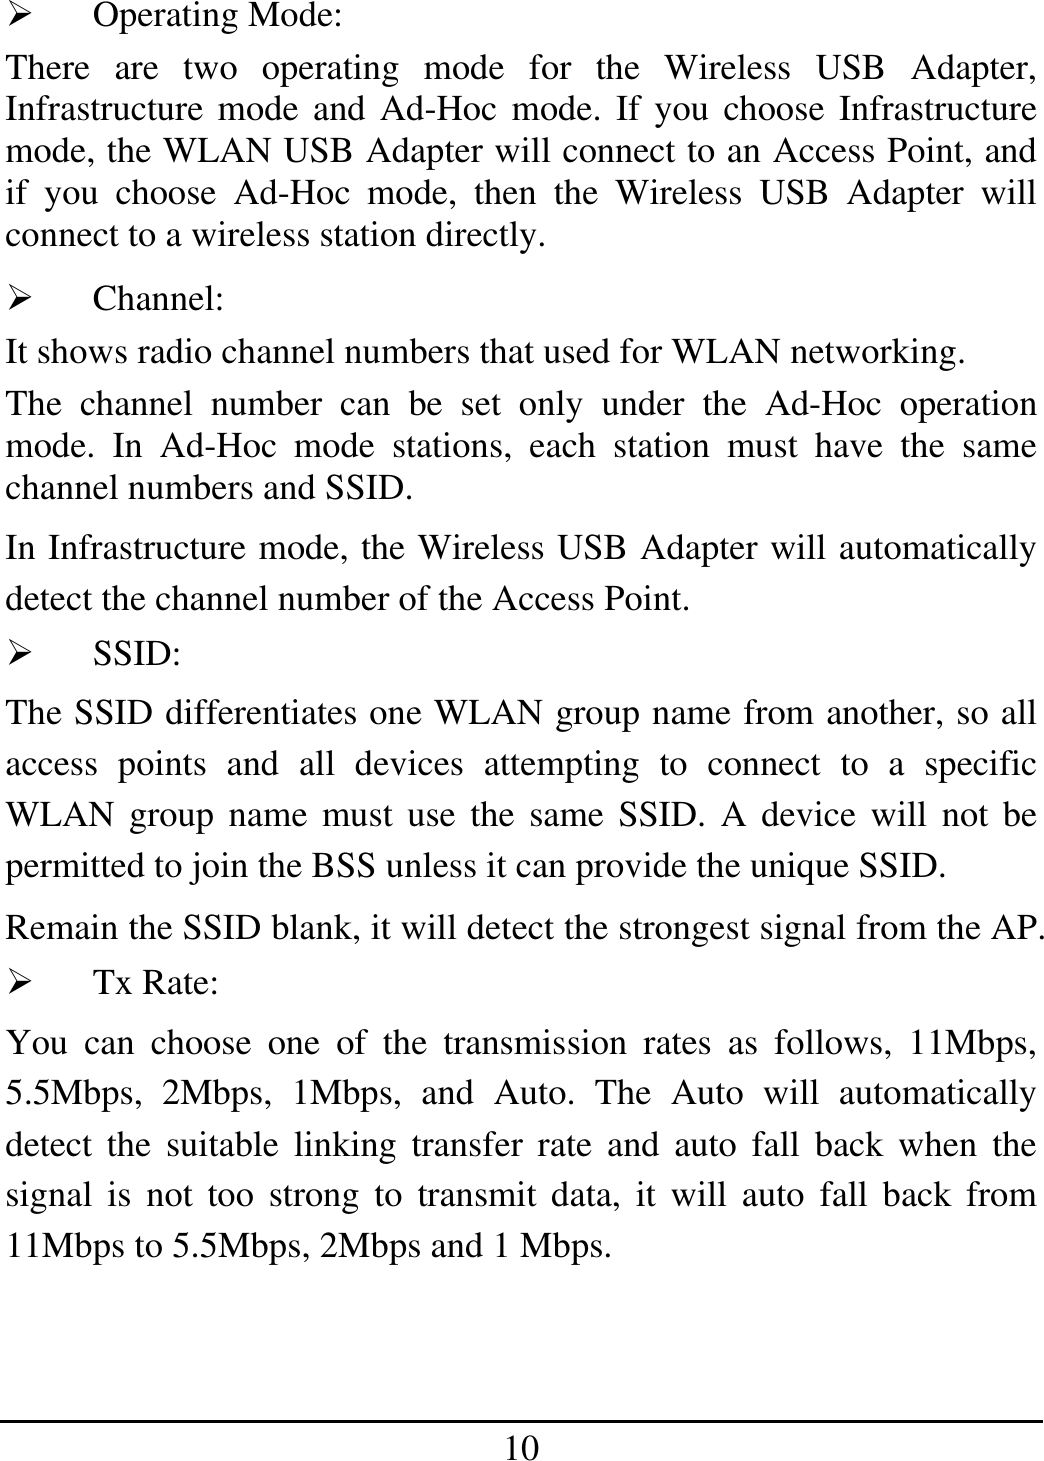 10   Operating Mode: There are two operating mode for the Wireless USB Adapter, Infrastructure mode and Ad-Hoc mode. If you choose Infrastructure mode, the WLAN USB Adapter will connect to an Access Point, and if you choose Ad-Hoc mode, then the Wireless USB Adapter will connect to a wireless station directly.   Channel: It shows radio channel numbers that used for WLAN networking.  The channel number can be set only under the Ad-Hoc operation mode. In Ad-Hoc mode stations, each station must have the same channel numbers and SSID.  In Infrastructure mode, the Wireless USB Adapter will automatically detect the channel number of the Access Point.   SSID: The SSID differentiates one WLAN group name from another, so all access points and all devices attempting to connect to a specific WLAN group name must use the same SSID. A device will not be permitted to join the BSS unless it can provide the unique SSID. Remain the SSID blank, it will detect the strongest signal from the AP.   Tx Rate: You can choose one of the transmission rates as follows, 11Mbps, 5.5Mbps, 2Mbps, 1Mbps, and Auto. The Auto will automatically detect the suitable linking transfer rate and auto fall back when the signal is not too strong to transmit data, it will auto fall back from 11Mbps to 5.5Mbps, 2Mbps and 1 Mbps.  